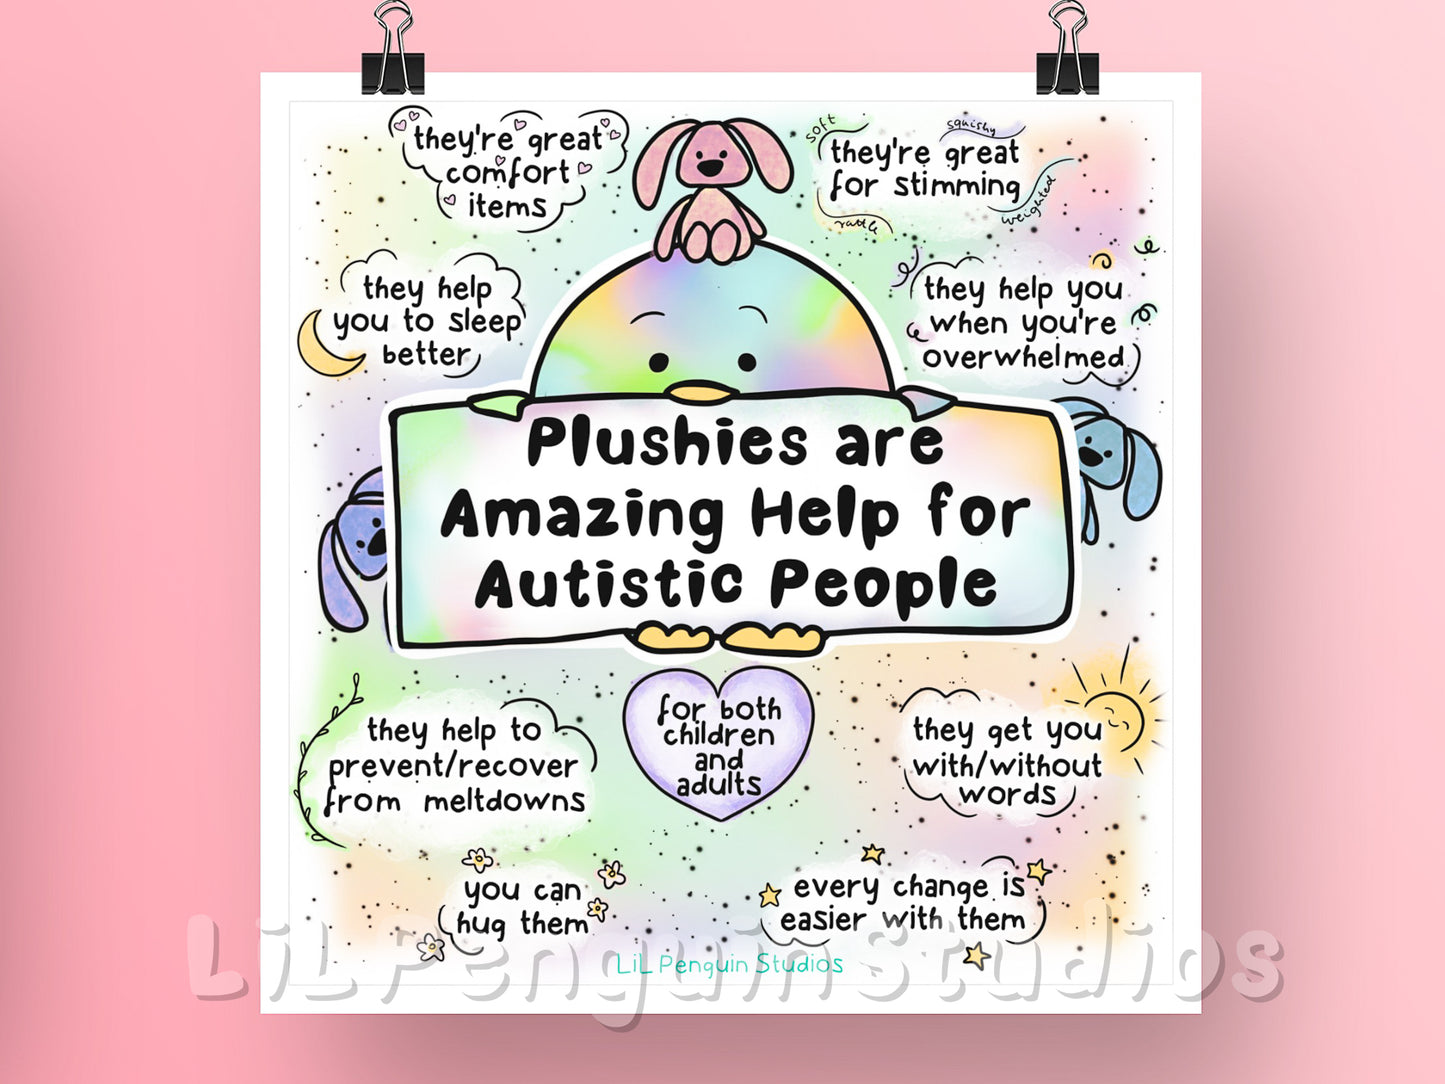 Autism Art Print. Plushies are amazing help for autistic people, children and adults equally💛 . Transcript: - they're great comfort items - they're great for stimming - they help you to sleep better - they help you when you're overwhelmed - they help to prevent/recover from meltdowns - they get you with or without words - you can hug them - and every change is easier with them